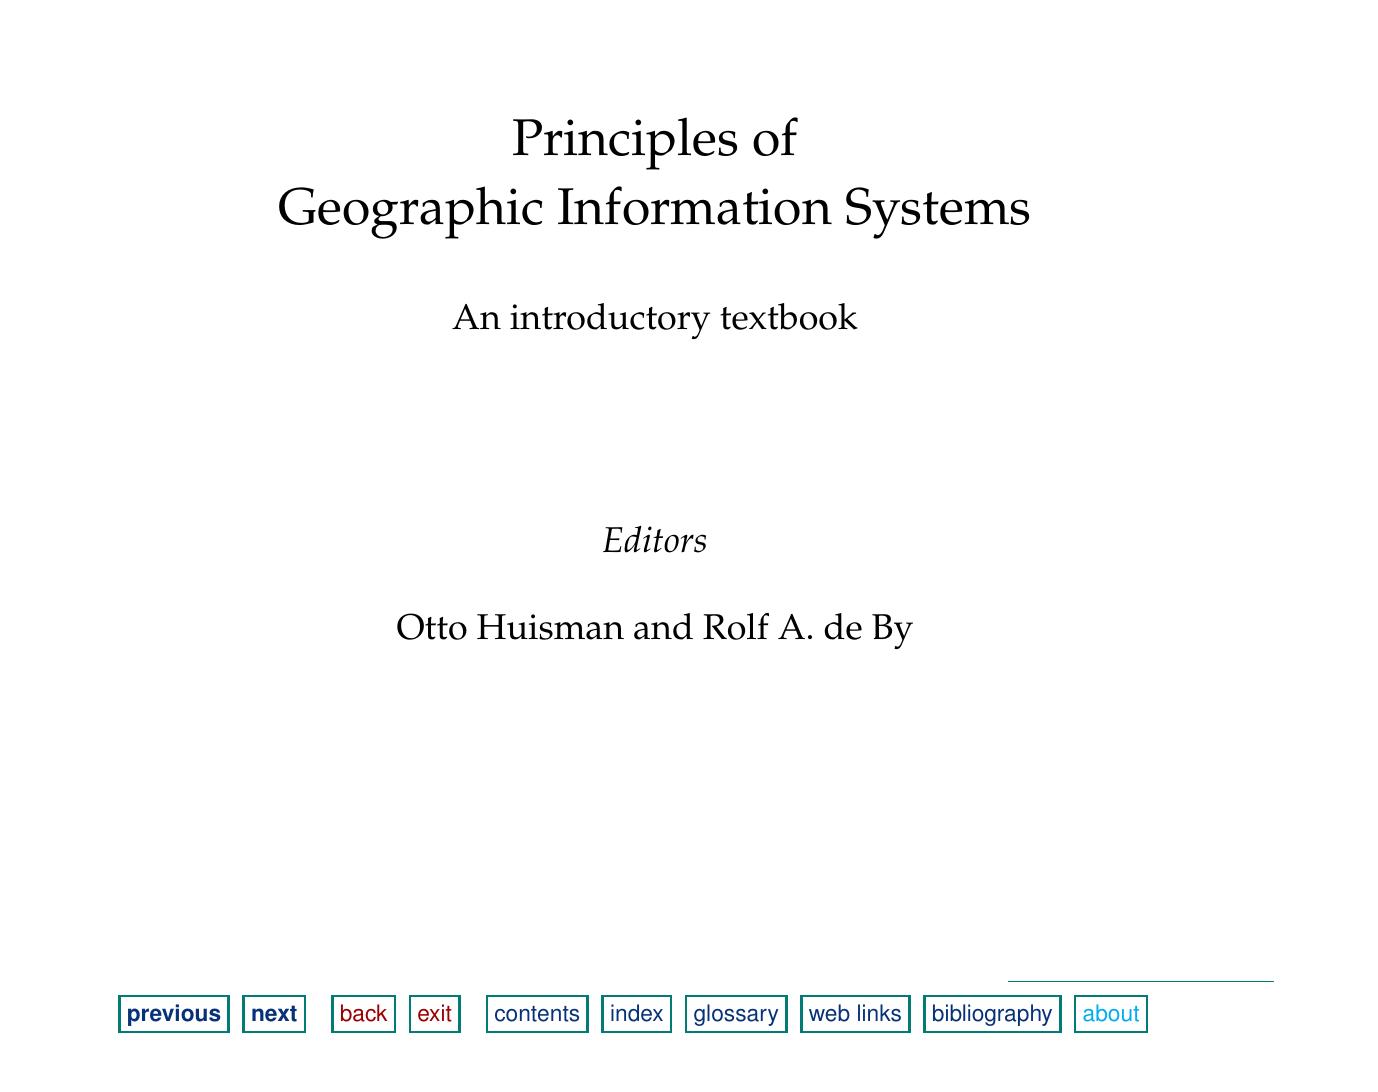 Principles of Geographic Information Systems—An introductory textbook